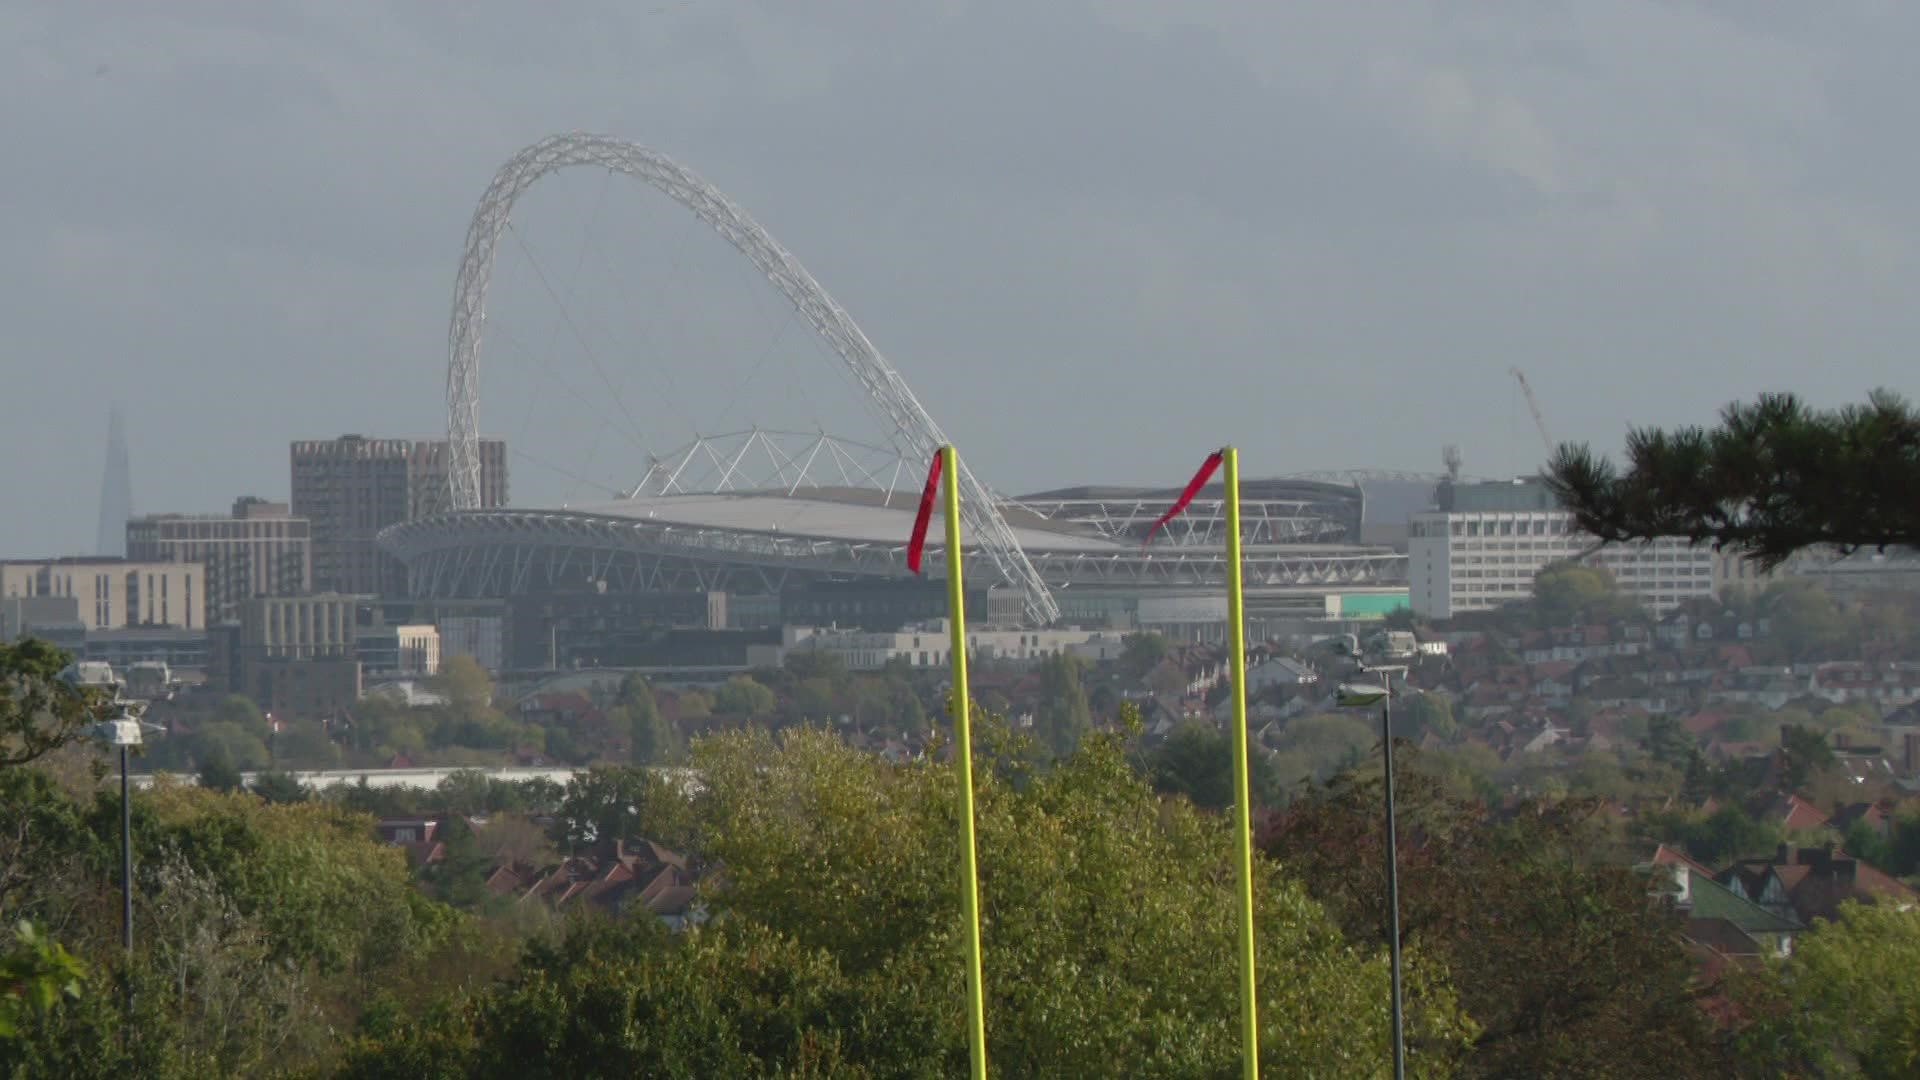 Wembley Stadium in the UK has had a long storied history.